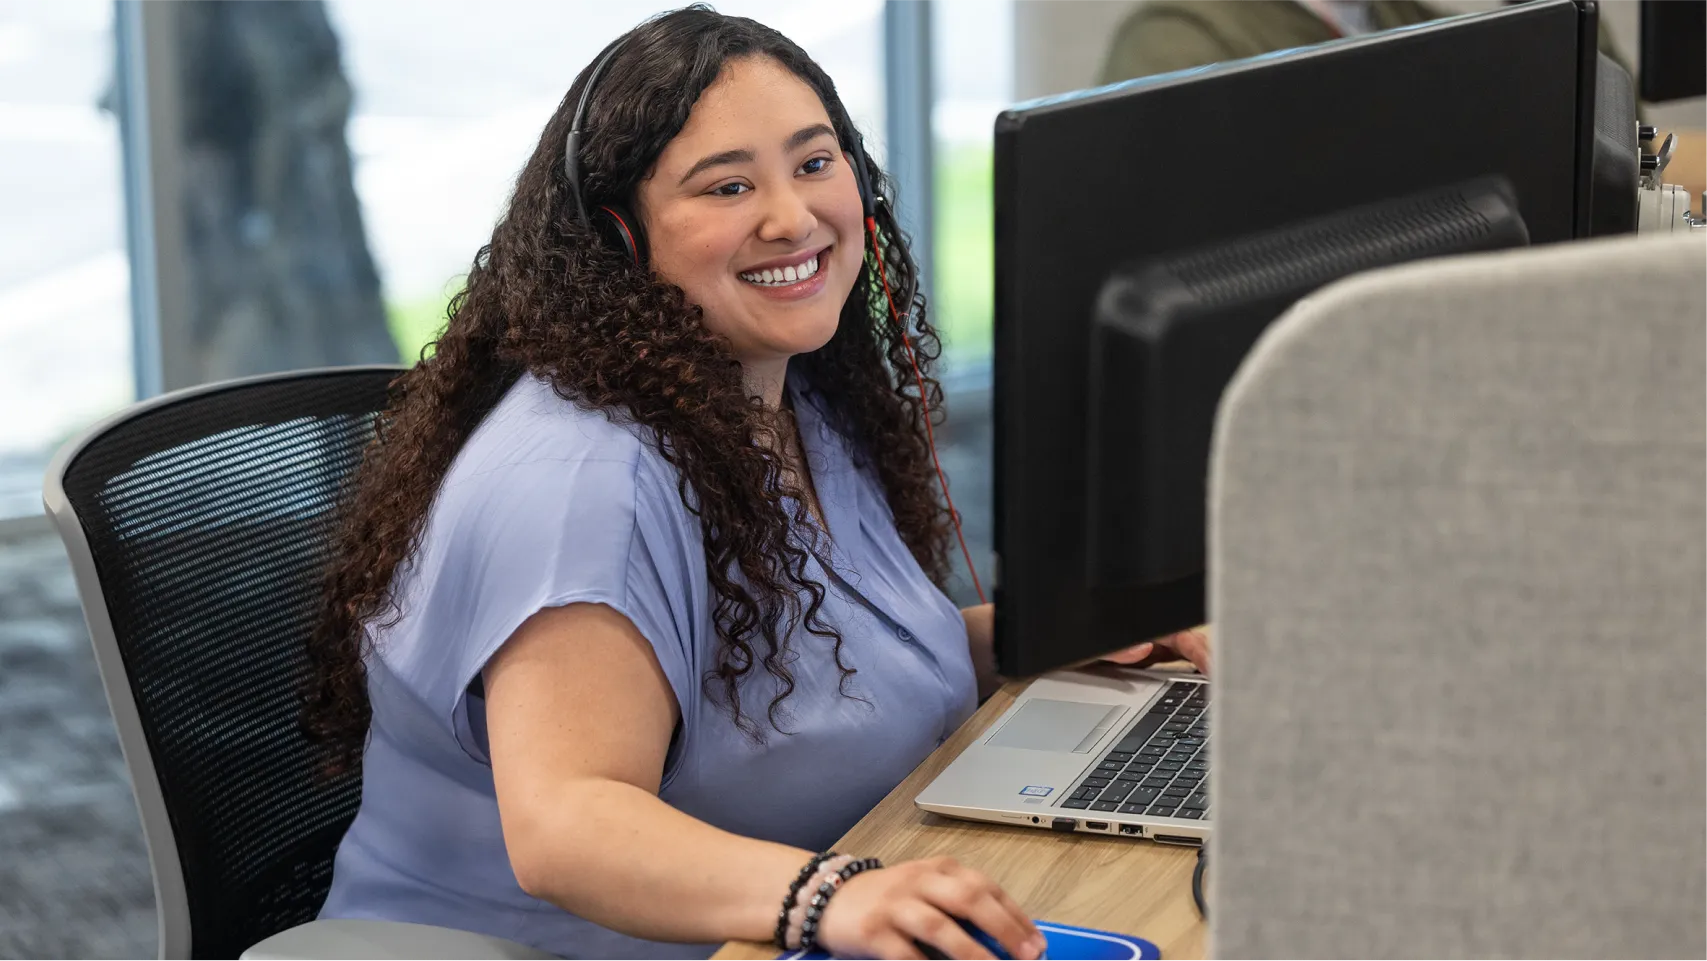 A customer care agent with long curly hair sits at a desk with a headset and smiles into the computer.